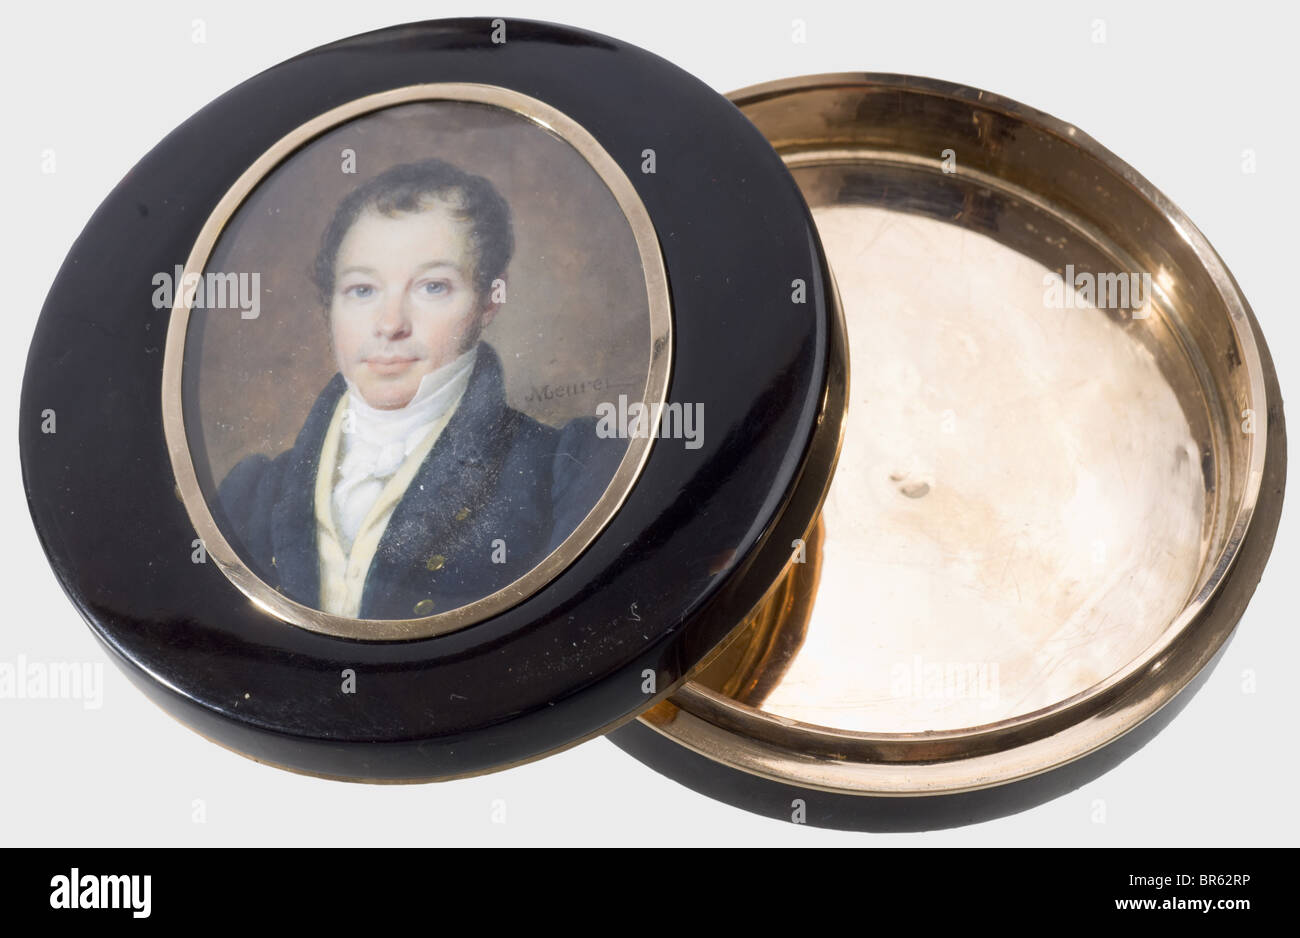 Francois Meuret (1800 - 1887) and Pierre Andre Montauban - a gold-lined tortoise shell box with a gentleman's portrait on ivory., Round shape, the inside lined with gold and stamped with the master's mark of Montauban as well as additional unclear hallmarks. On the lid a finely painted portrait of a gentleman in plainclothes, on the right border signed 'Meuret'. Diameter 7.8 cm. Francois Meuret, French miniature painter, painter to the court of King Louis Philippe and the family d'Orleans, already exhibits 1822 in the Paris Salon. He wins 1827 and 184, Artist's Copyright has not to be cleared Stock Photo